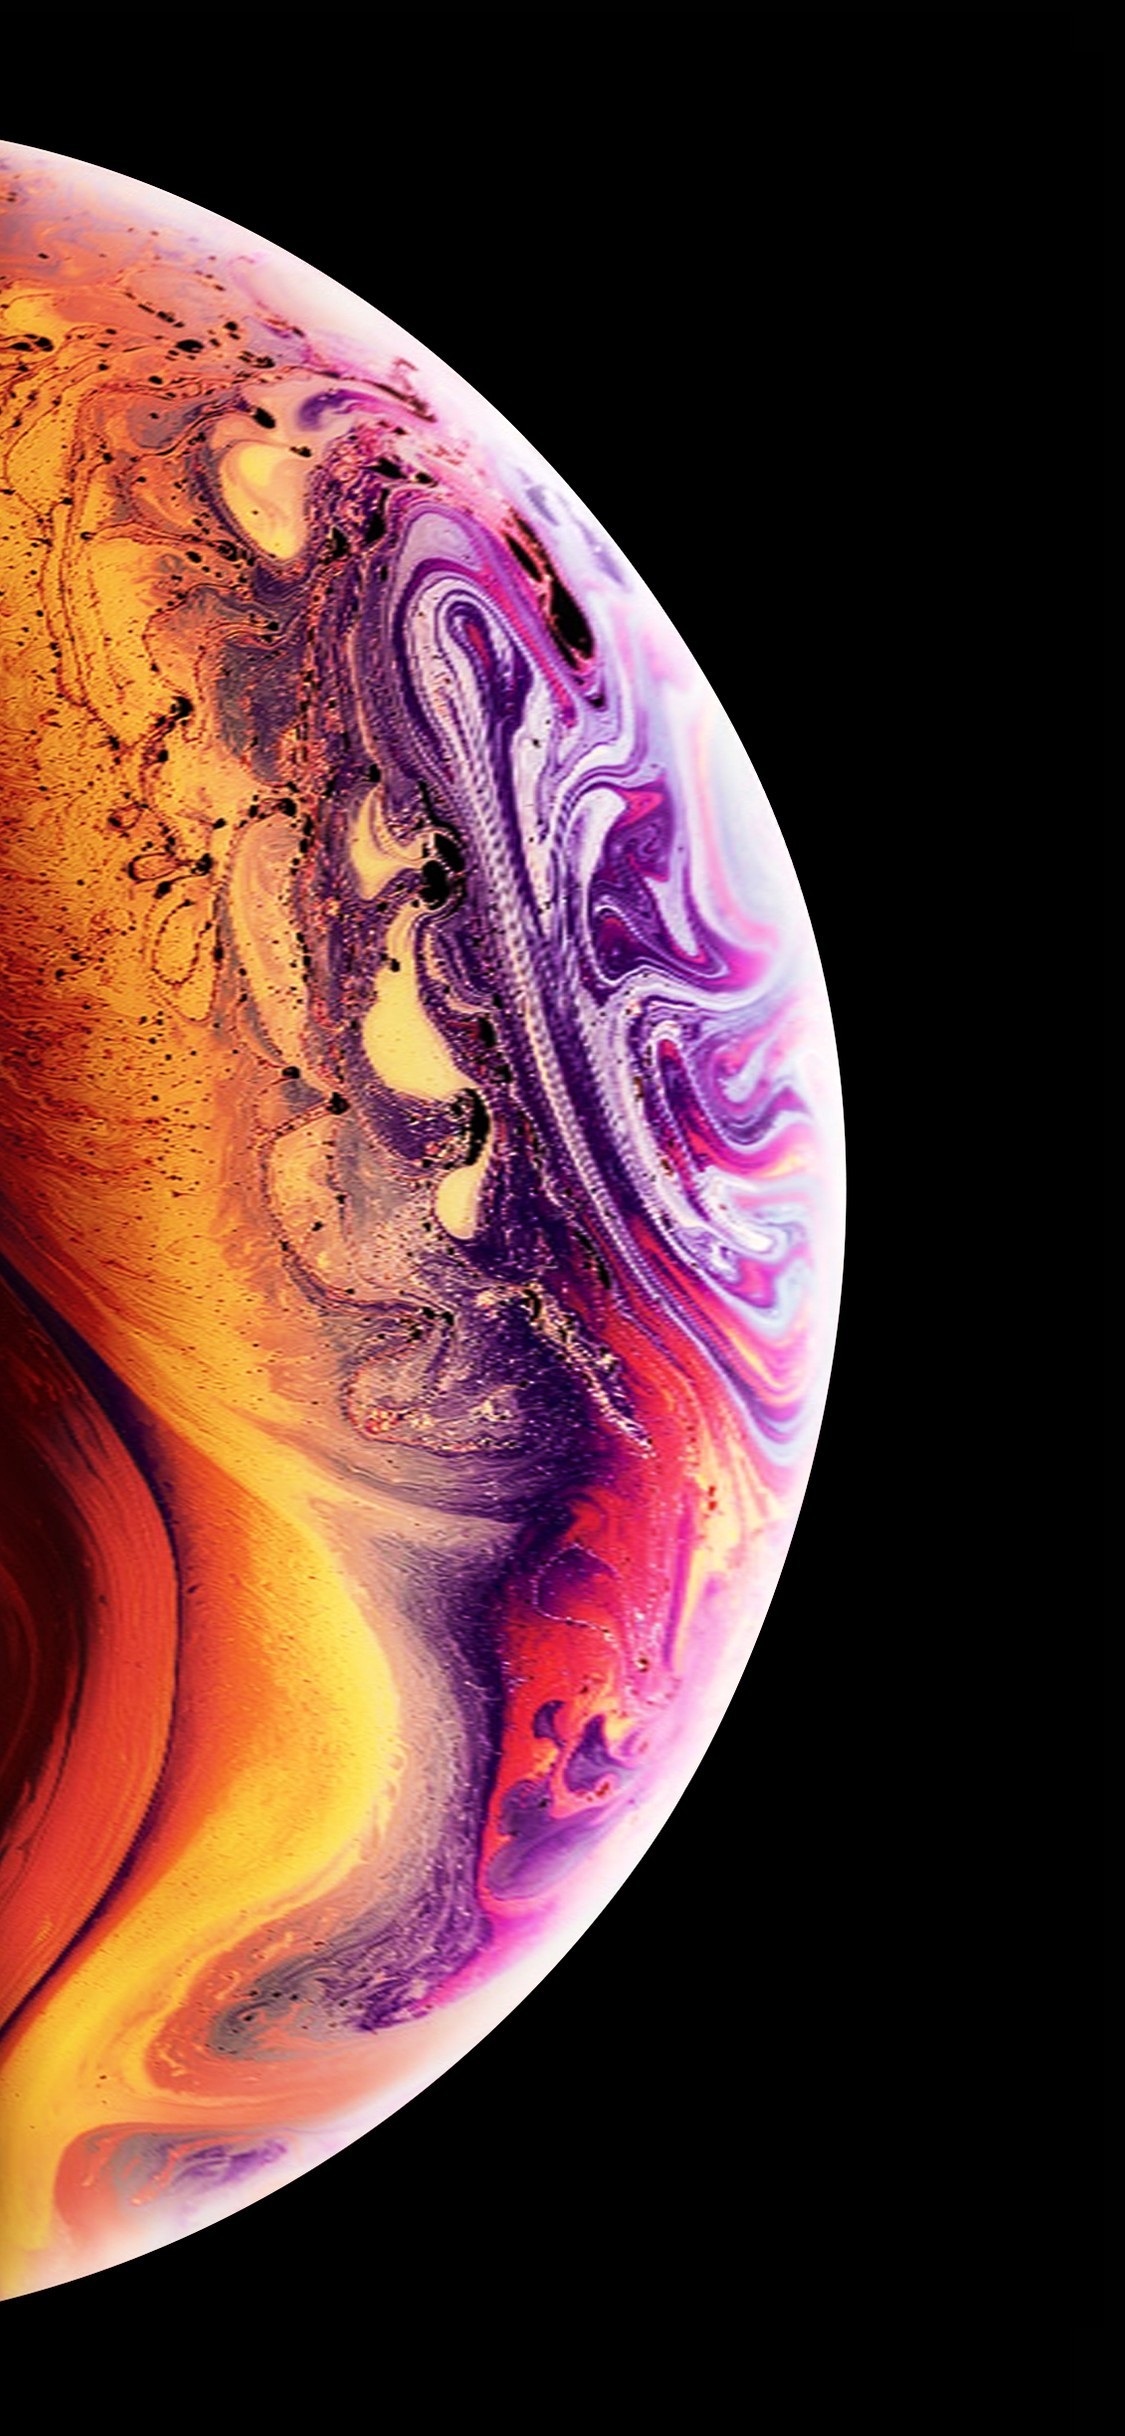 Iphone Xs Screen Lock Wallpaper With High-resolution - Iphone X - HD Wallpaper 